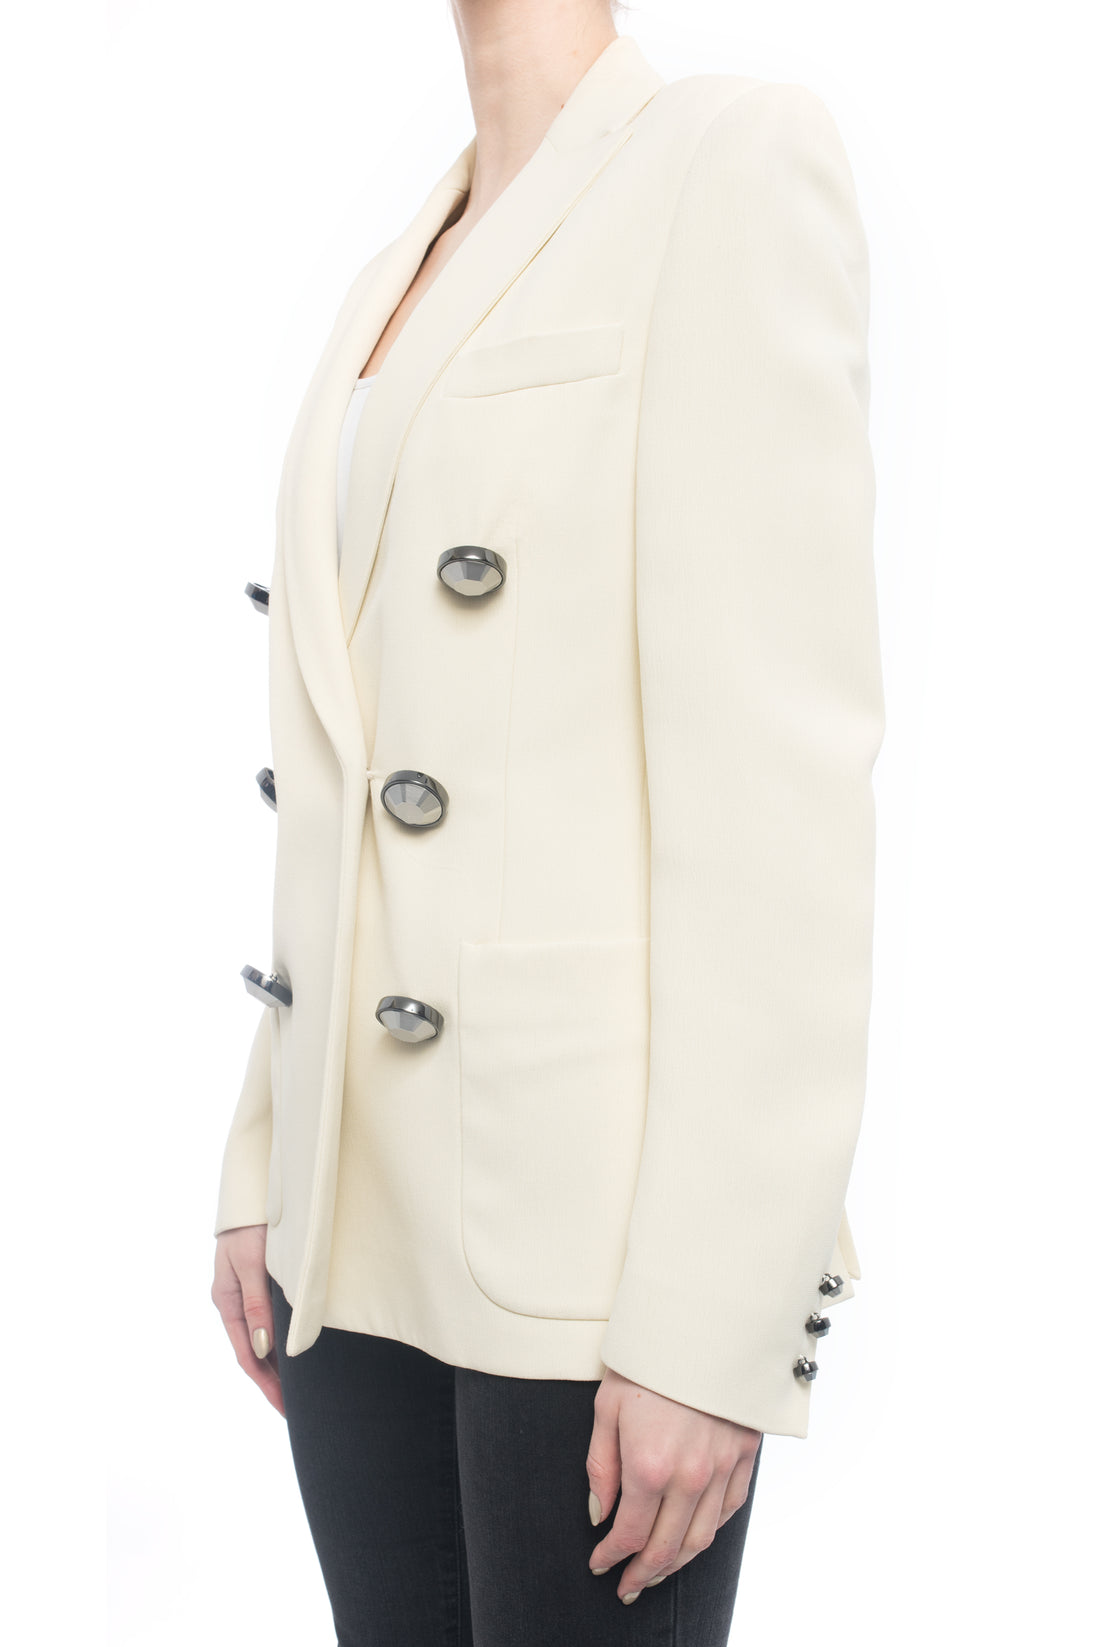 Christopher Kane Spring 2015 Runway Ivory Jacket with Silver Buttons - 4